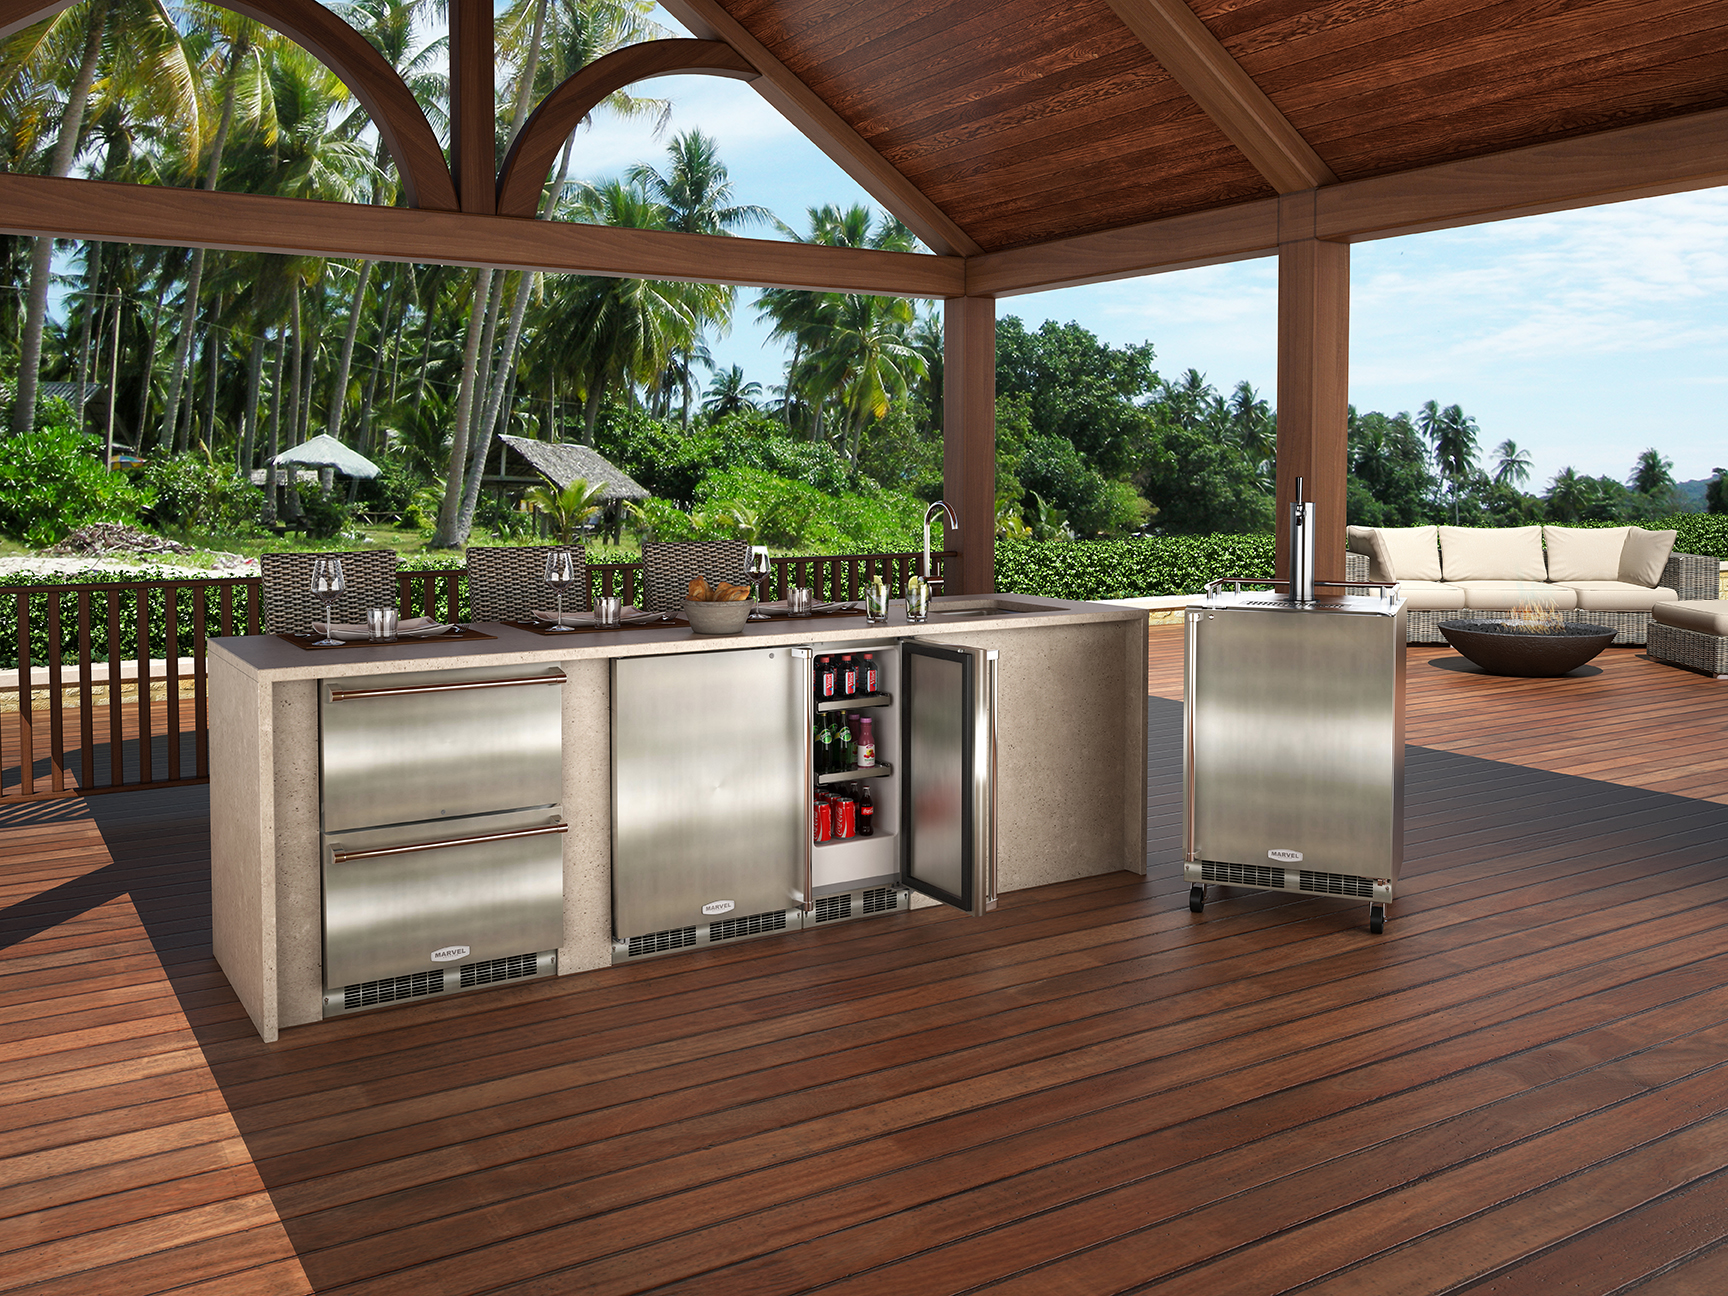 Marvel Outdoor Refrigeration has been developed and tested to endure the elements for maximum performance in outdoor kitchens.